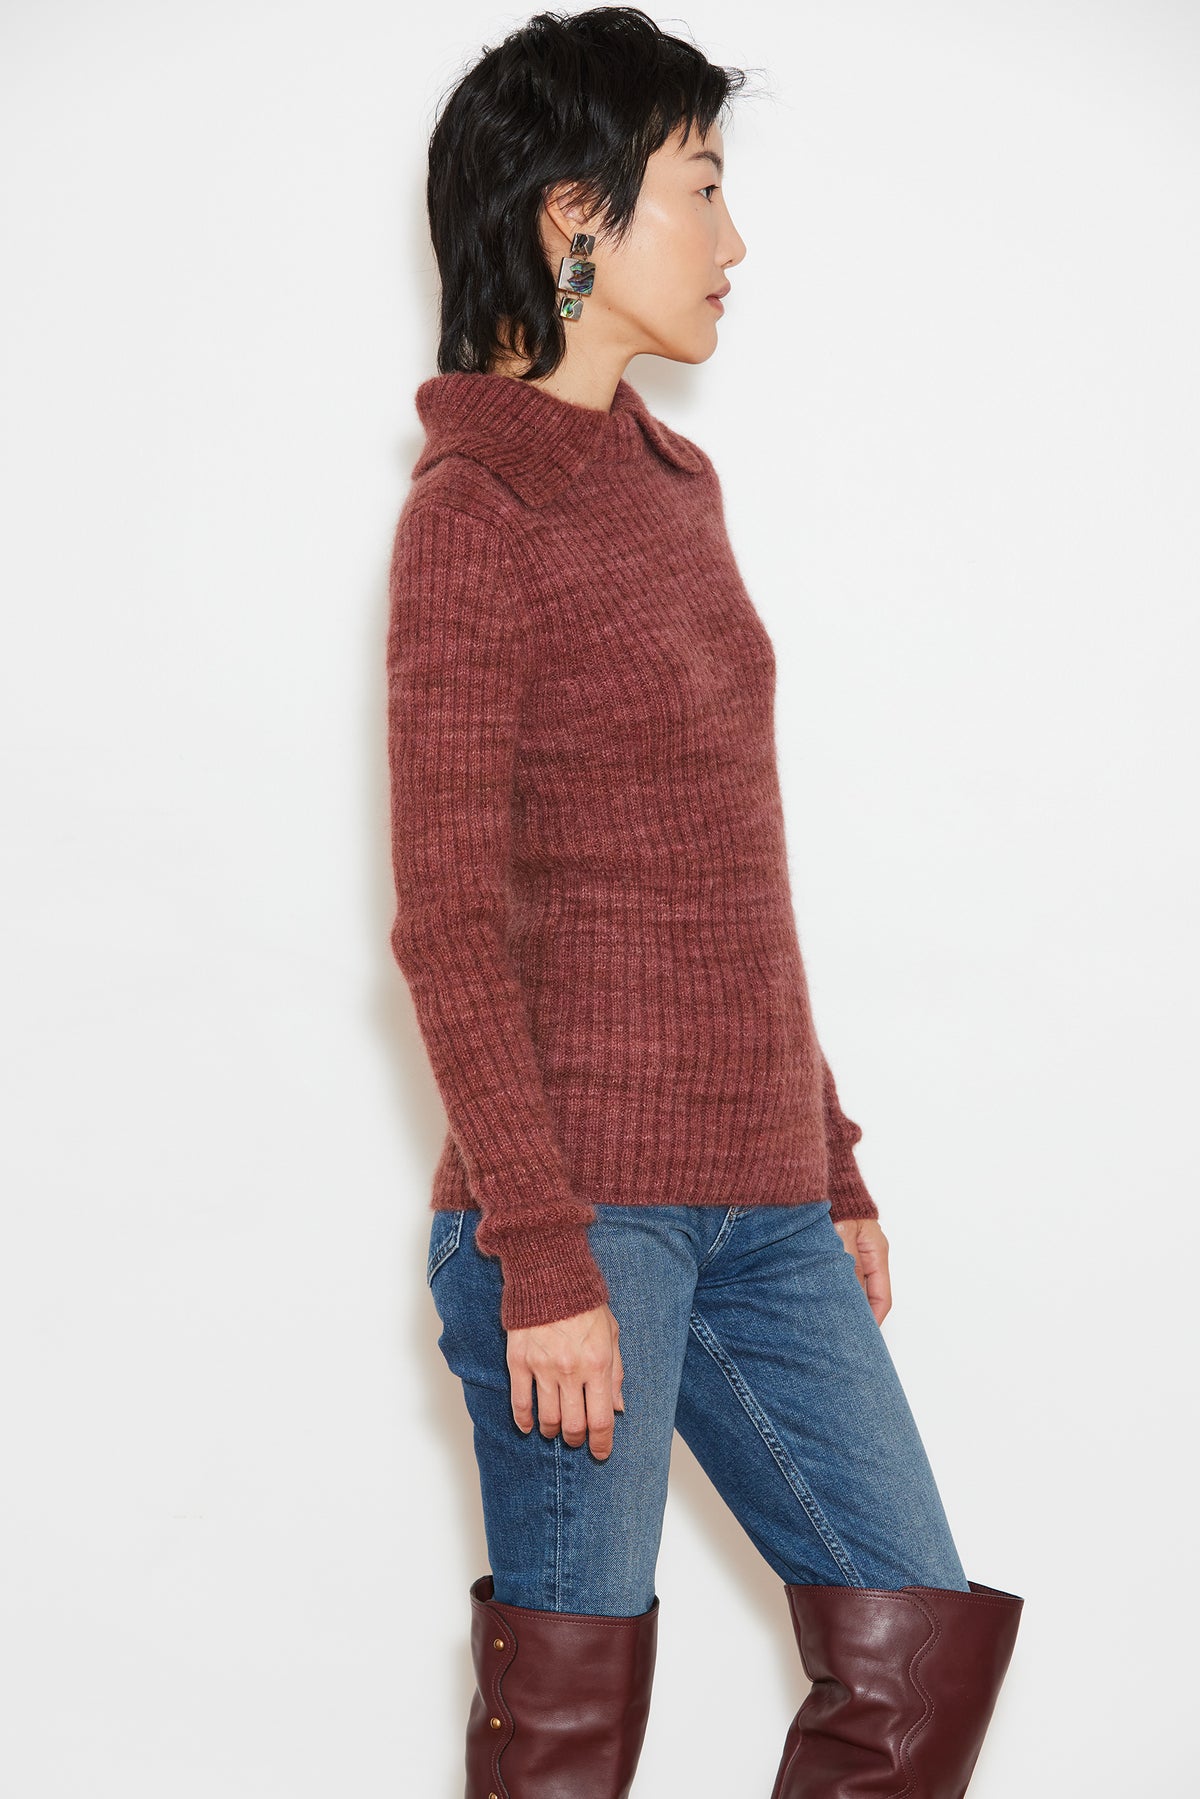 Adult Ines Sweater - Madder Root